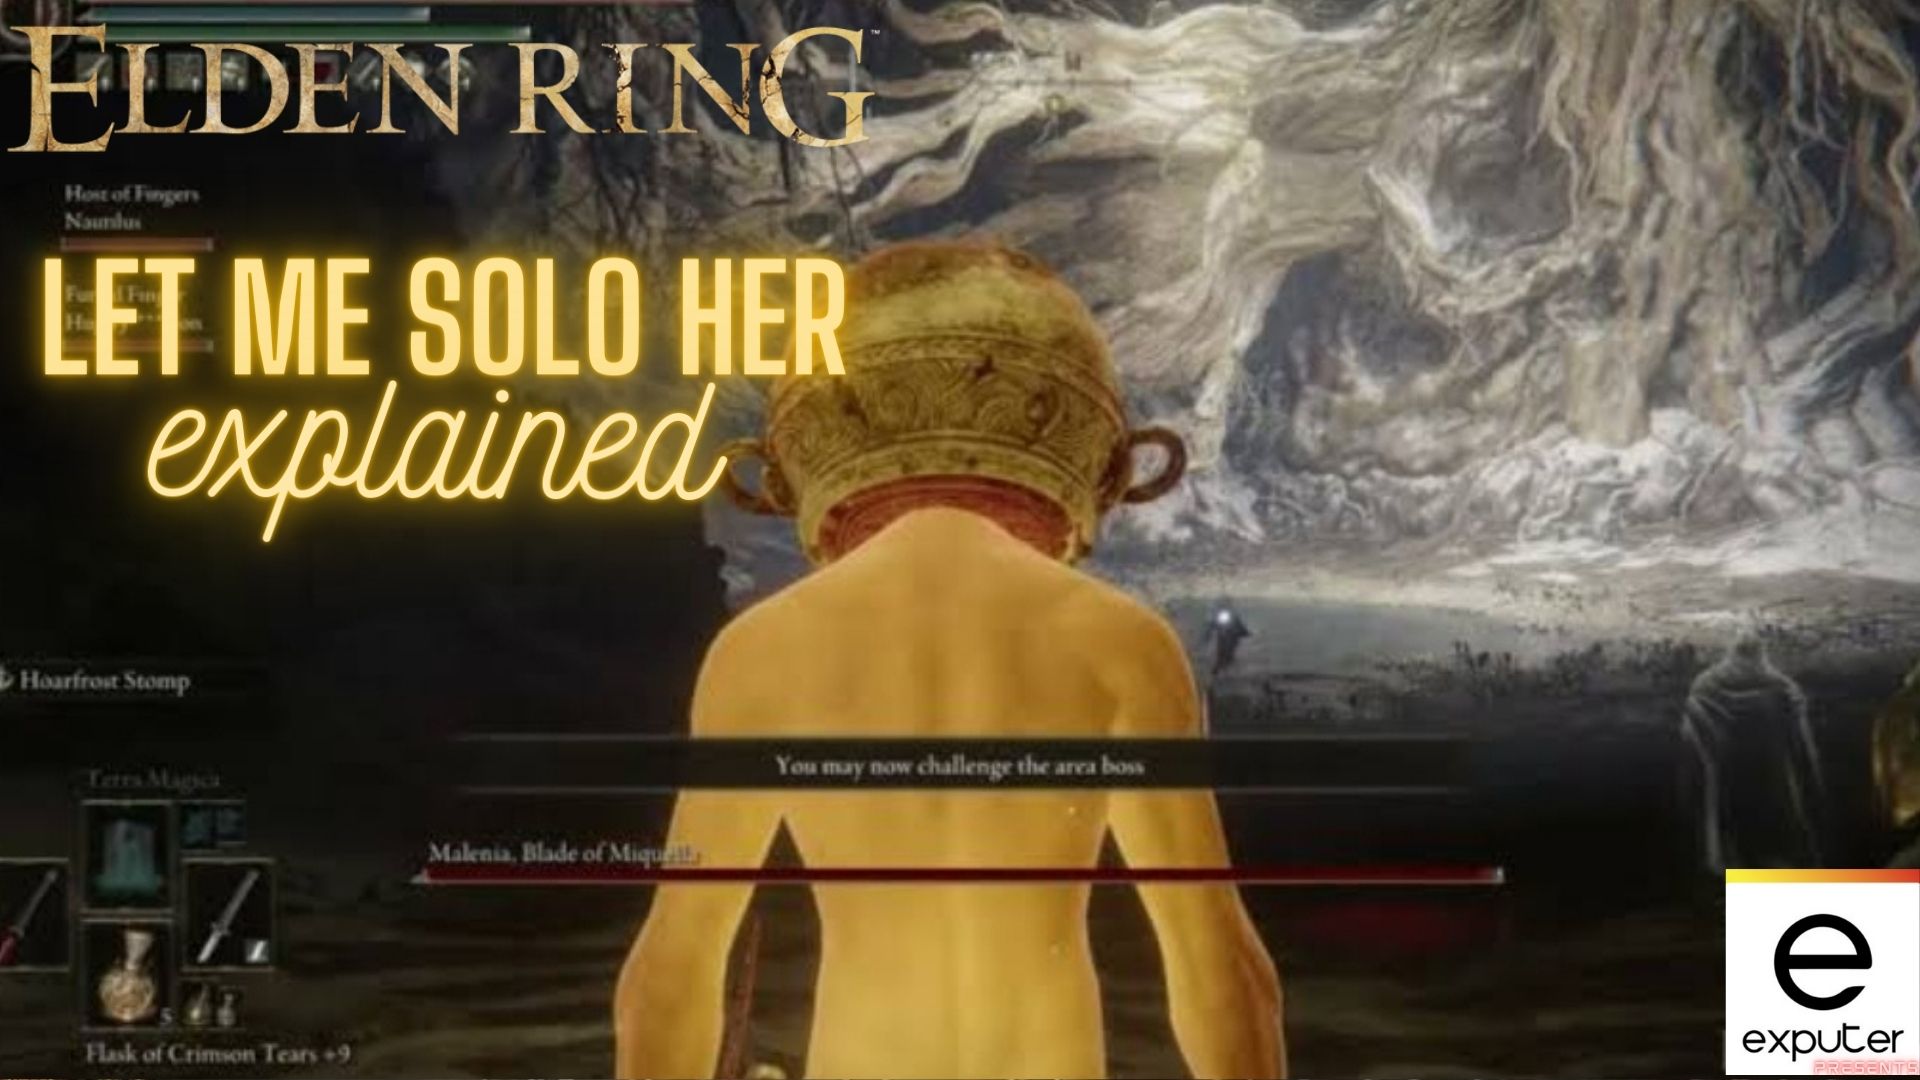 Let Me Solo Her. Legendary Elden Ring Summon - Monster Stat within :  r/UnearthedArcana